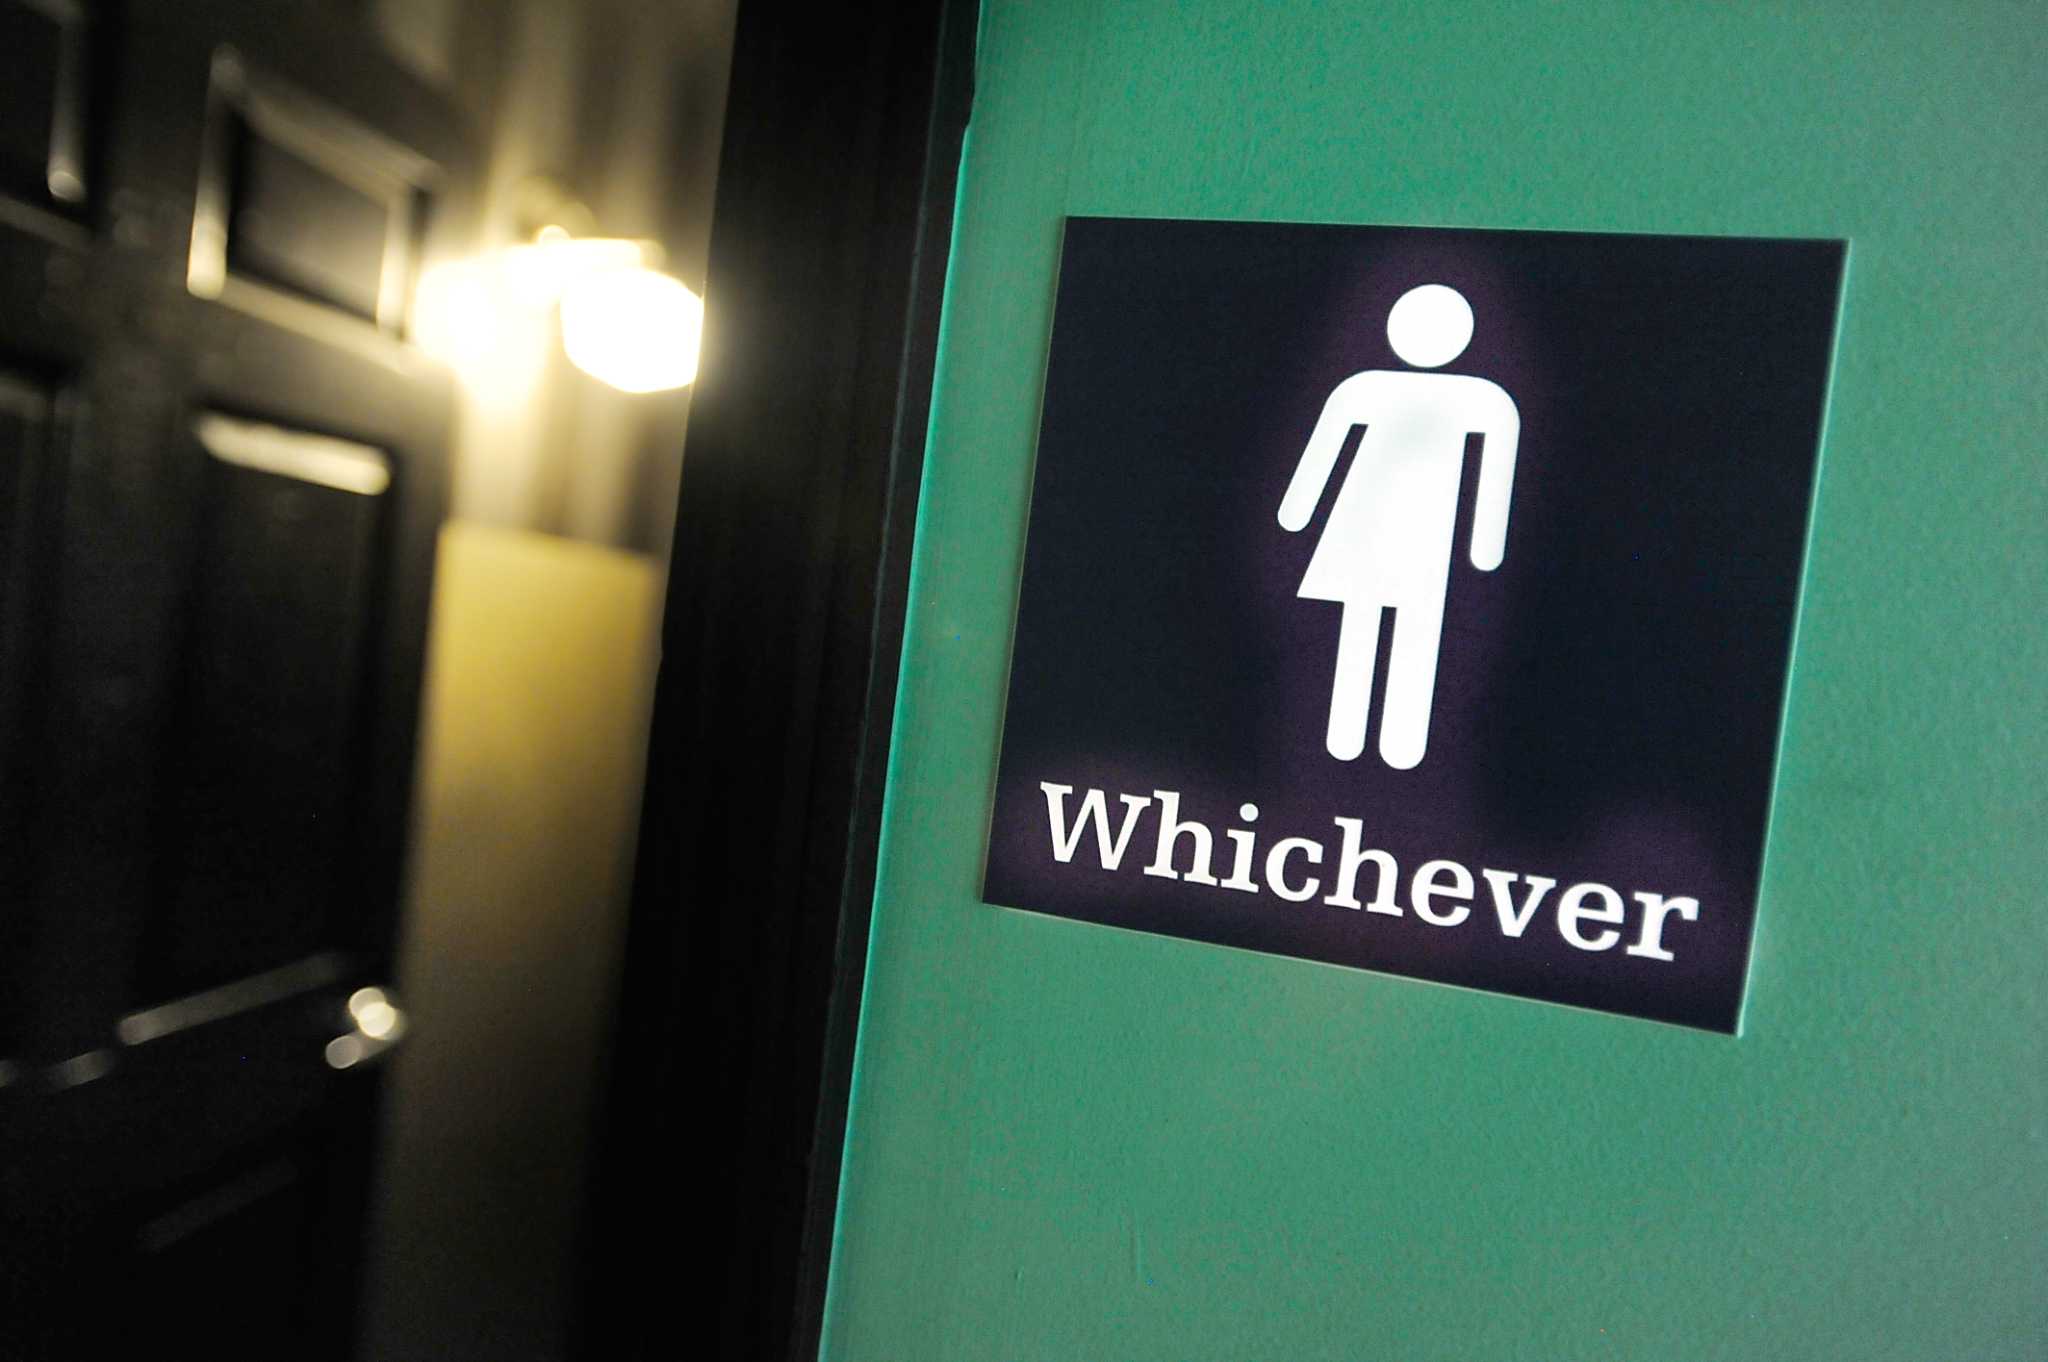 House adopts bathroom restrictions for transgender students